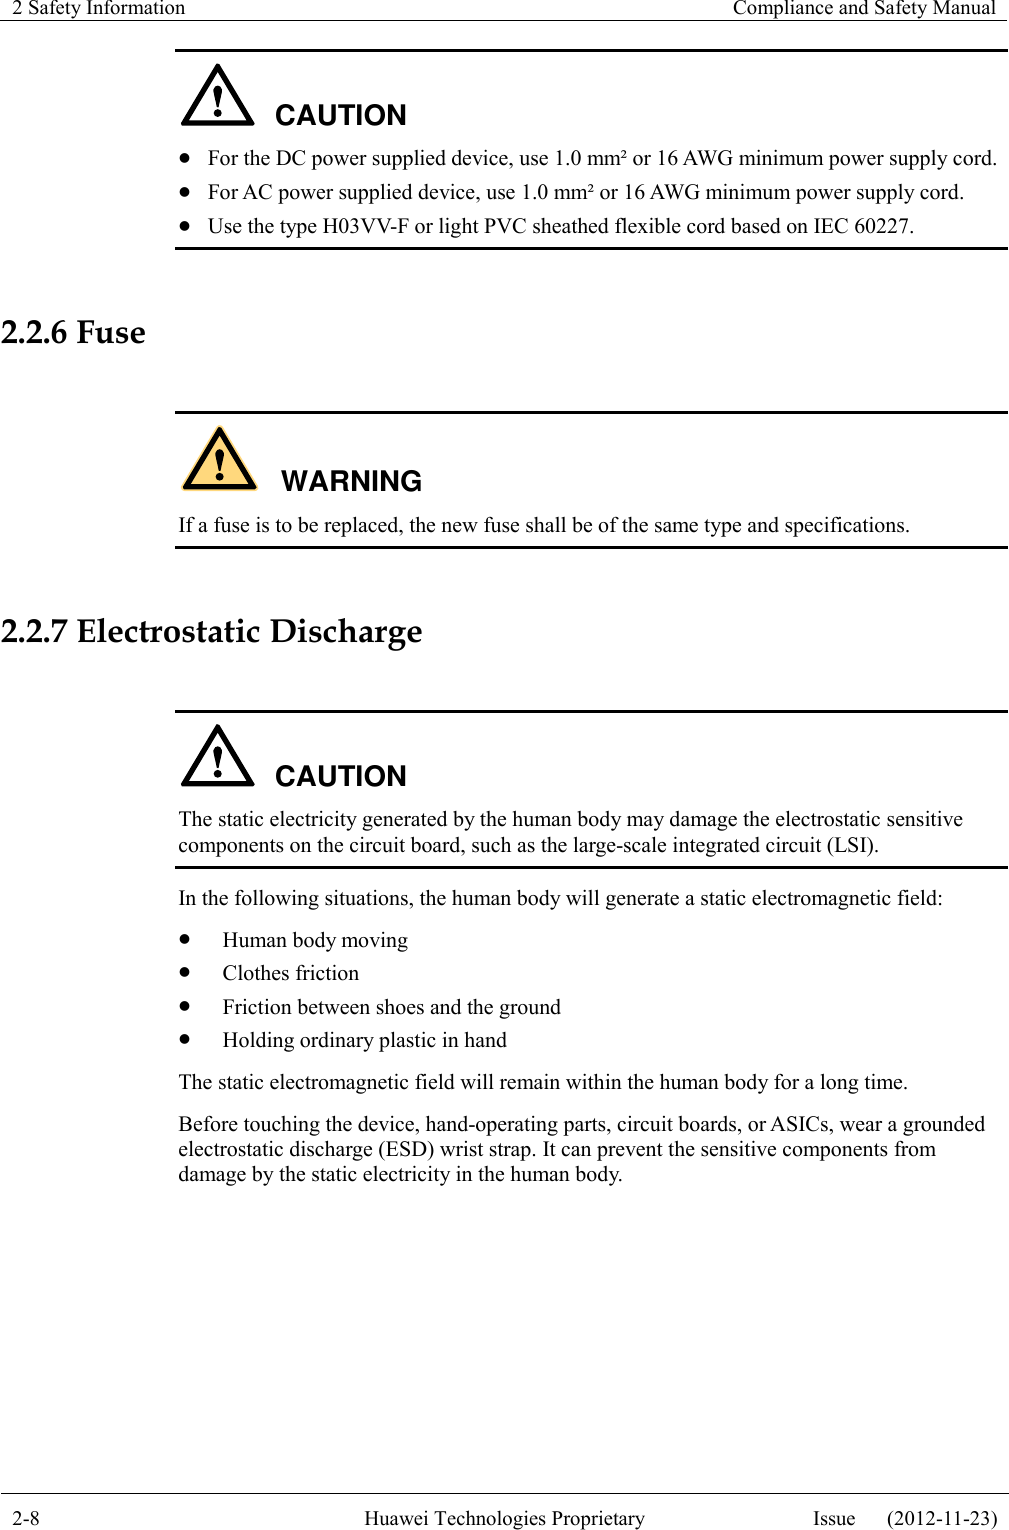 2 Safety Information    Compliance and Safety Manual  2-8 Huawei Technologies Proprietary Issue      (2012-11-23)  CAUTION  For the DC power supplied device, use 1.0 mm² or 16 AWG minimum power supply cord.  For AC power supplied device, use 1.0 mm² or 16 AWG minimum power supply cord.  Use the type H03VV-F or light PVC sheathed flexible cord based on IEC 60227.  2.2.6 Fuse  WARNING If a fuse is to be replaced, the new fuse shall be of the same type and specifications.  2.2.7 Electrostatic Discharge  CAUTION The static electricity generated by the human body may damage the electrostatic sensitive components on the circuit board, such as the large-scale integrated circuit (LSI). In the following situations, the human body will generate a static electromagnetic field:  Human body moving  Clothes friction  Friction between shoes and the ground  Holding ordinary plastic in hand The static electromagnetic field will remain within the human body for a long time. Before touching the device, hand-operating parts, circuit boards, or ASICs, wear a grounded electrostatic discharge (ESD) wrist strap. It can prevent the sensitive components from damage by the static electricity in the human body. 